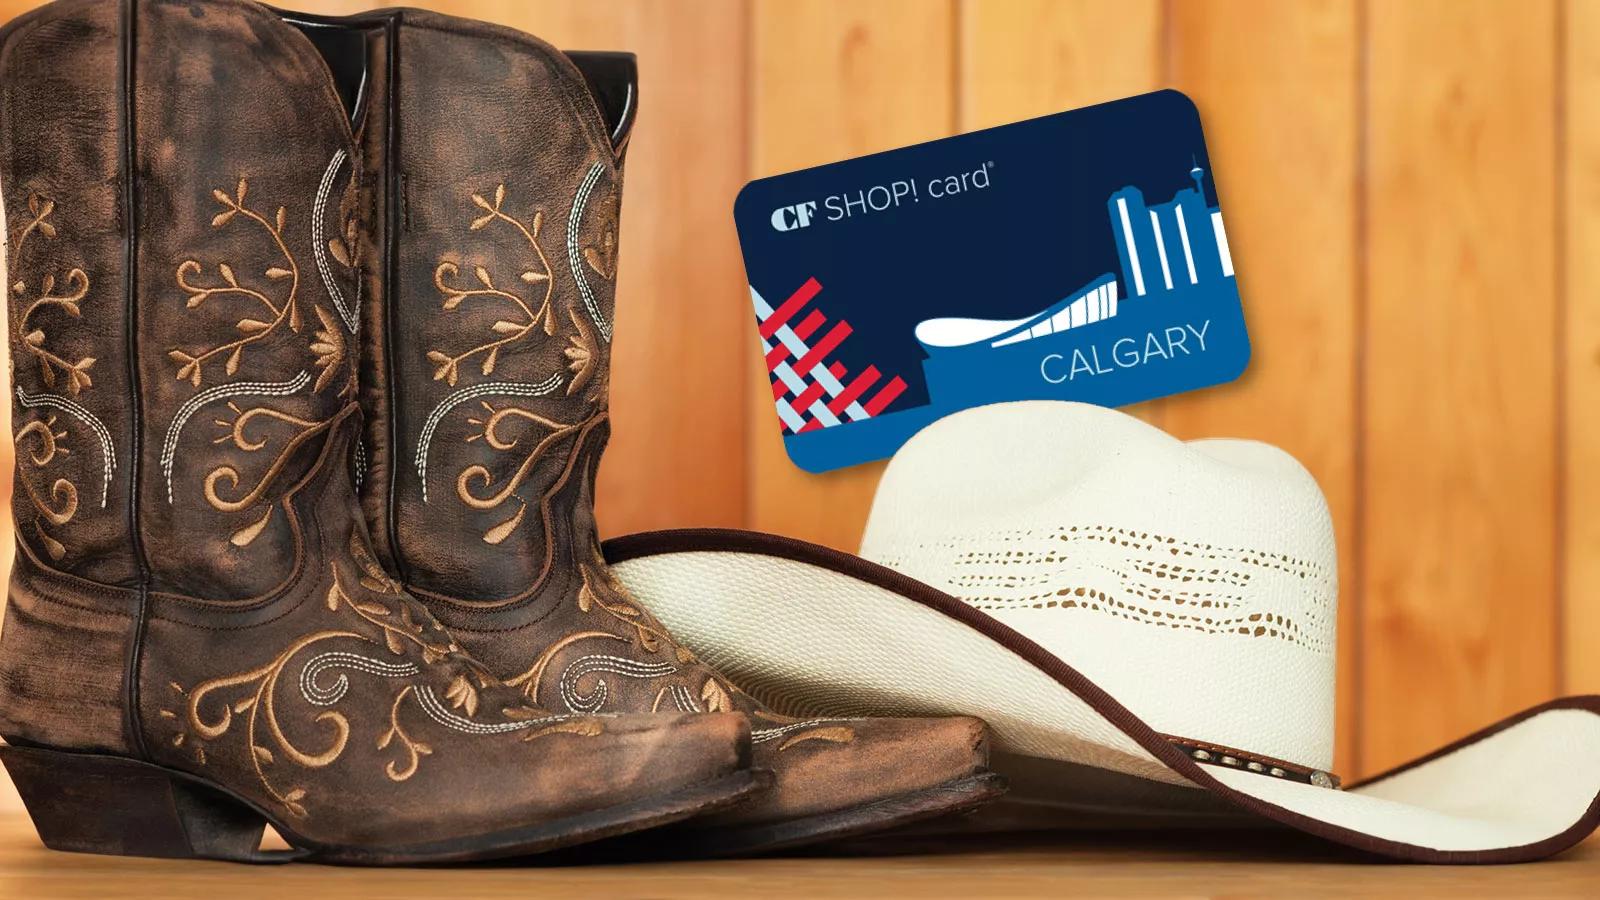 [CF Chinook Centre] Calgary Stampede CF Shop Card Offer